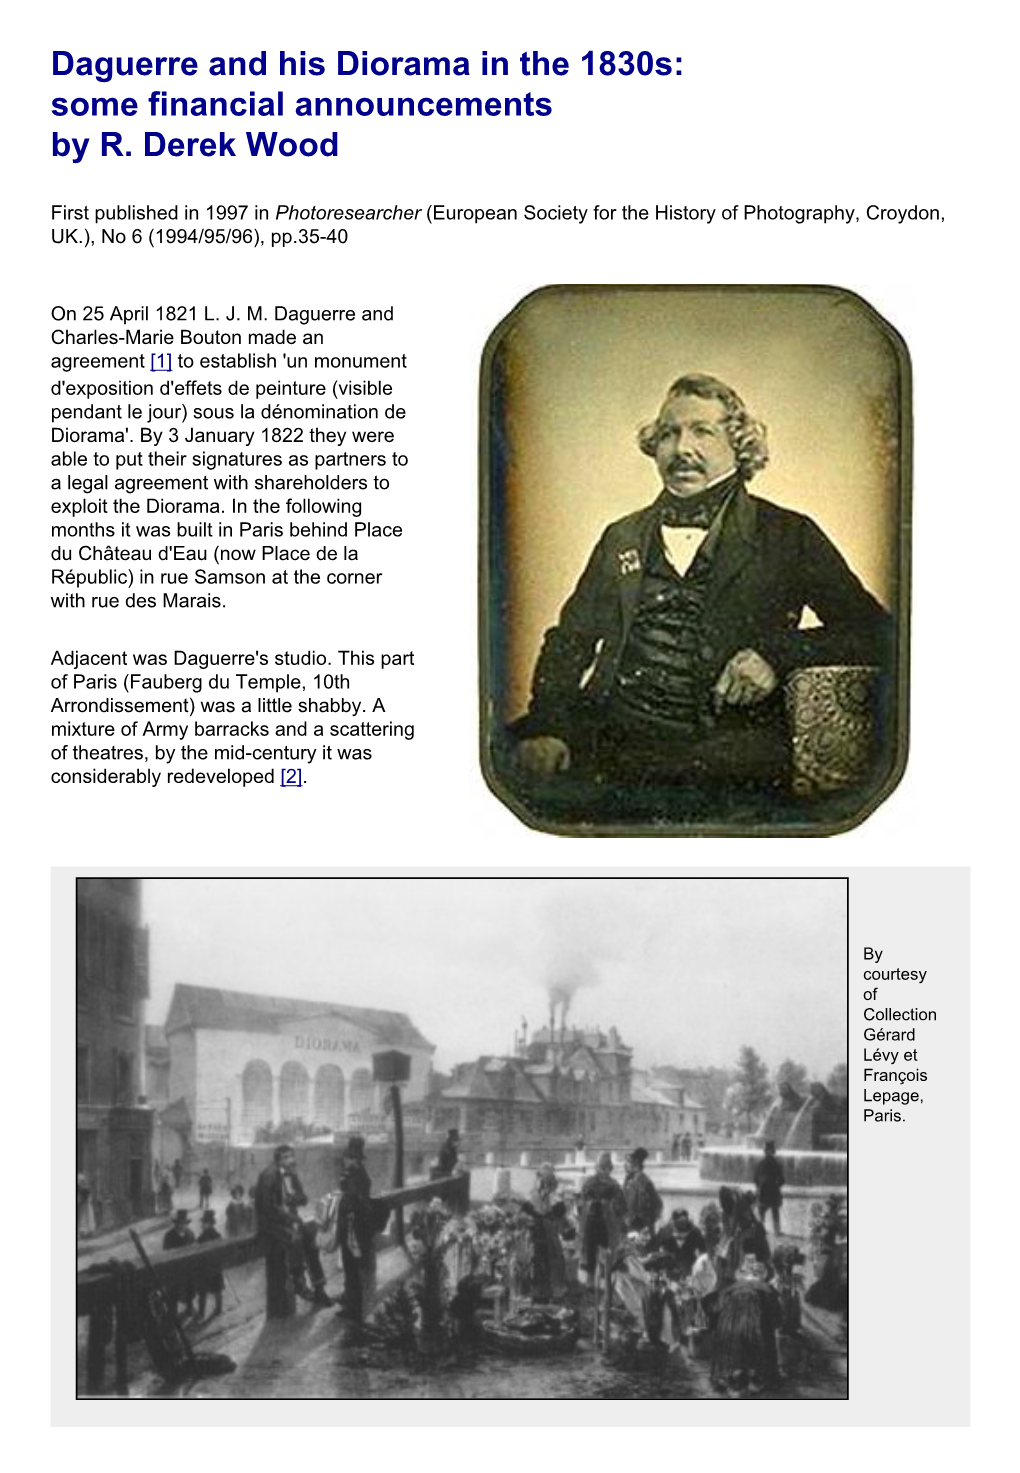 Daguerre and His Diorama in Paris in the 1830S